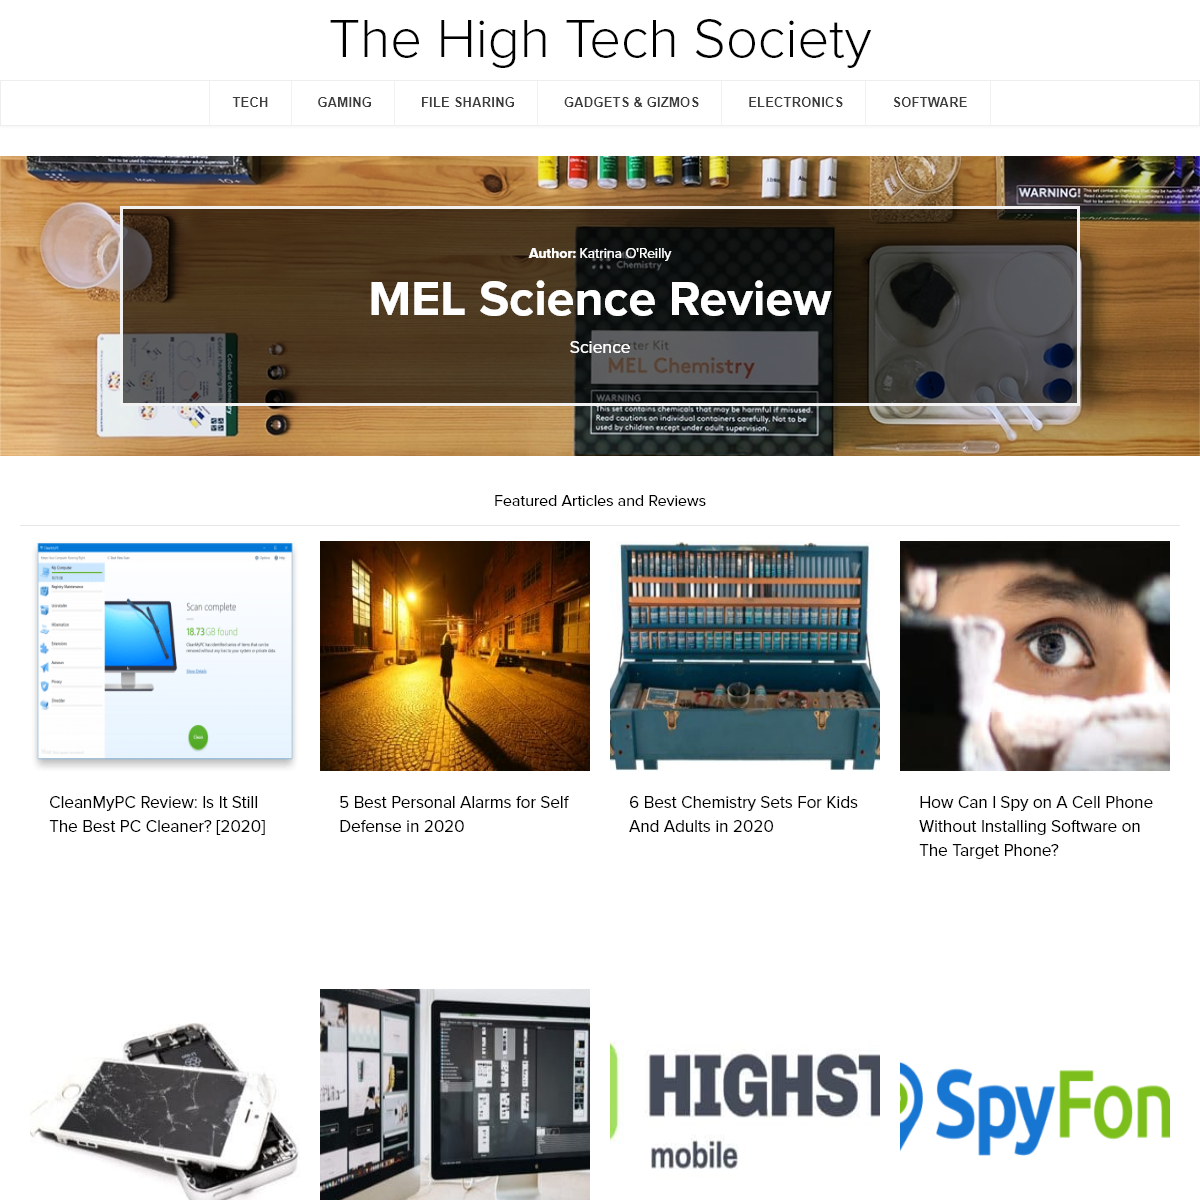 A complete backup of thehightechsociety.com